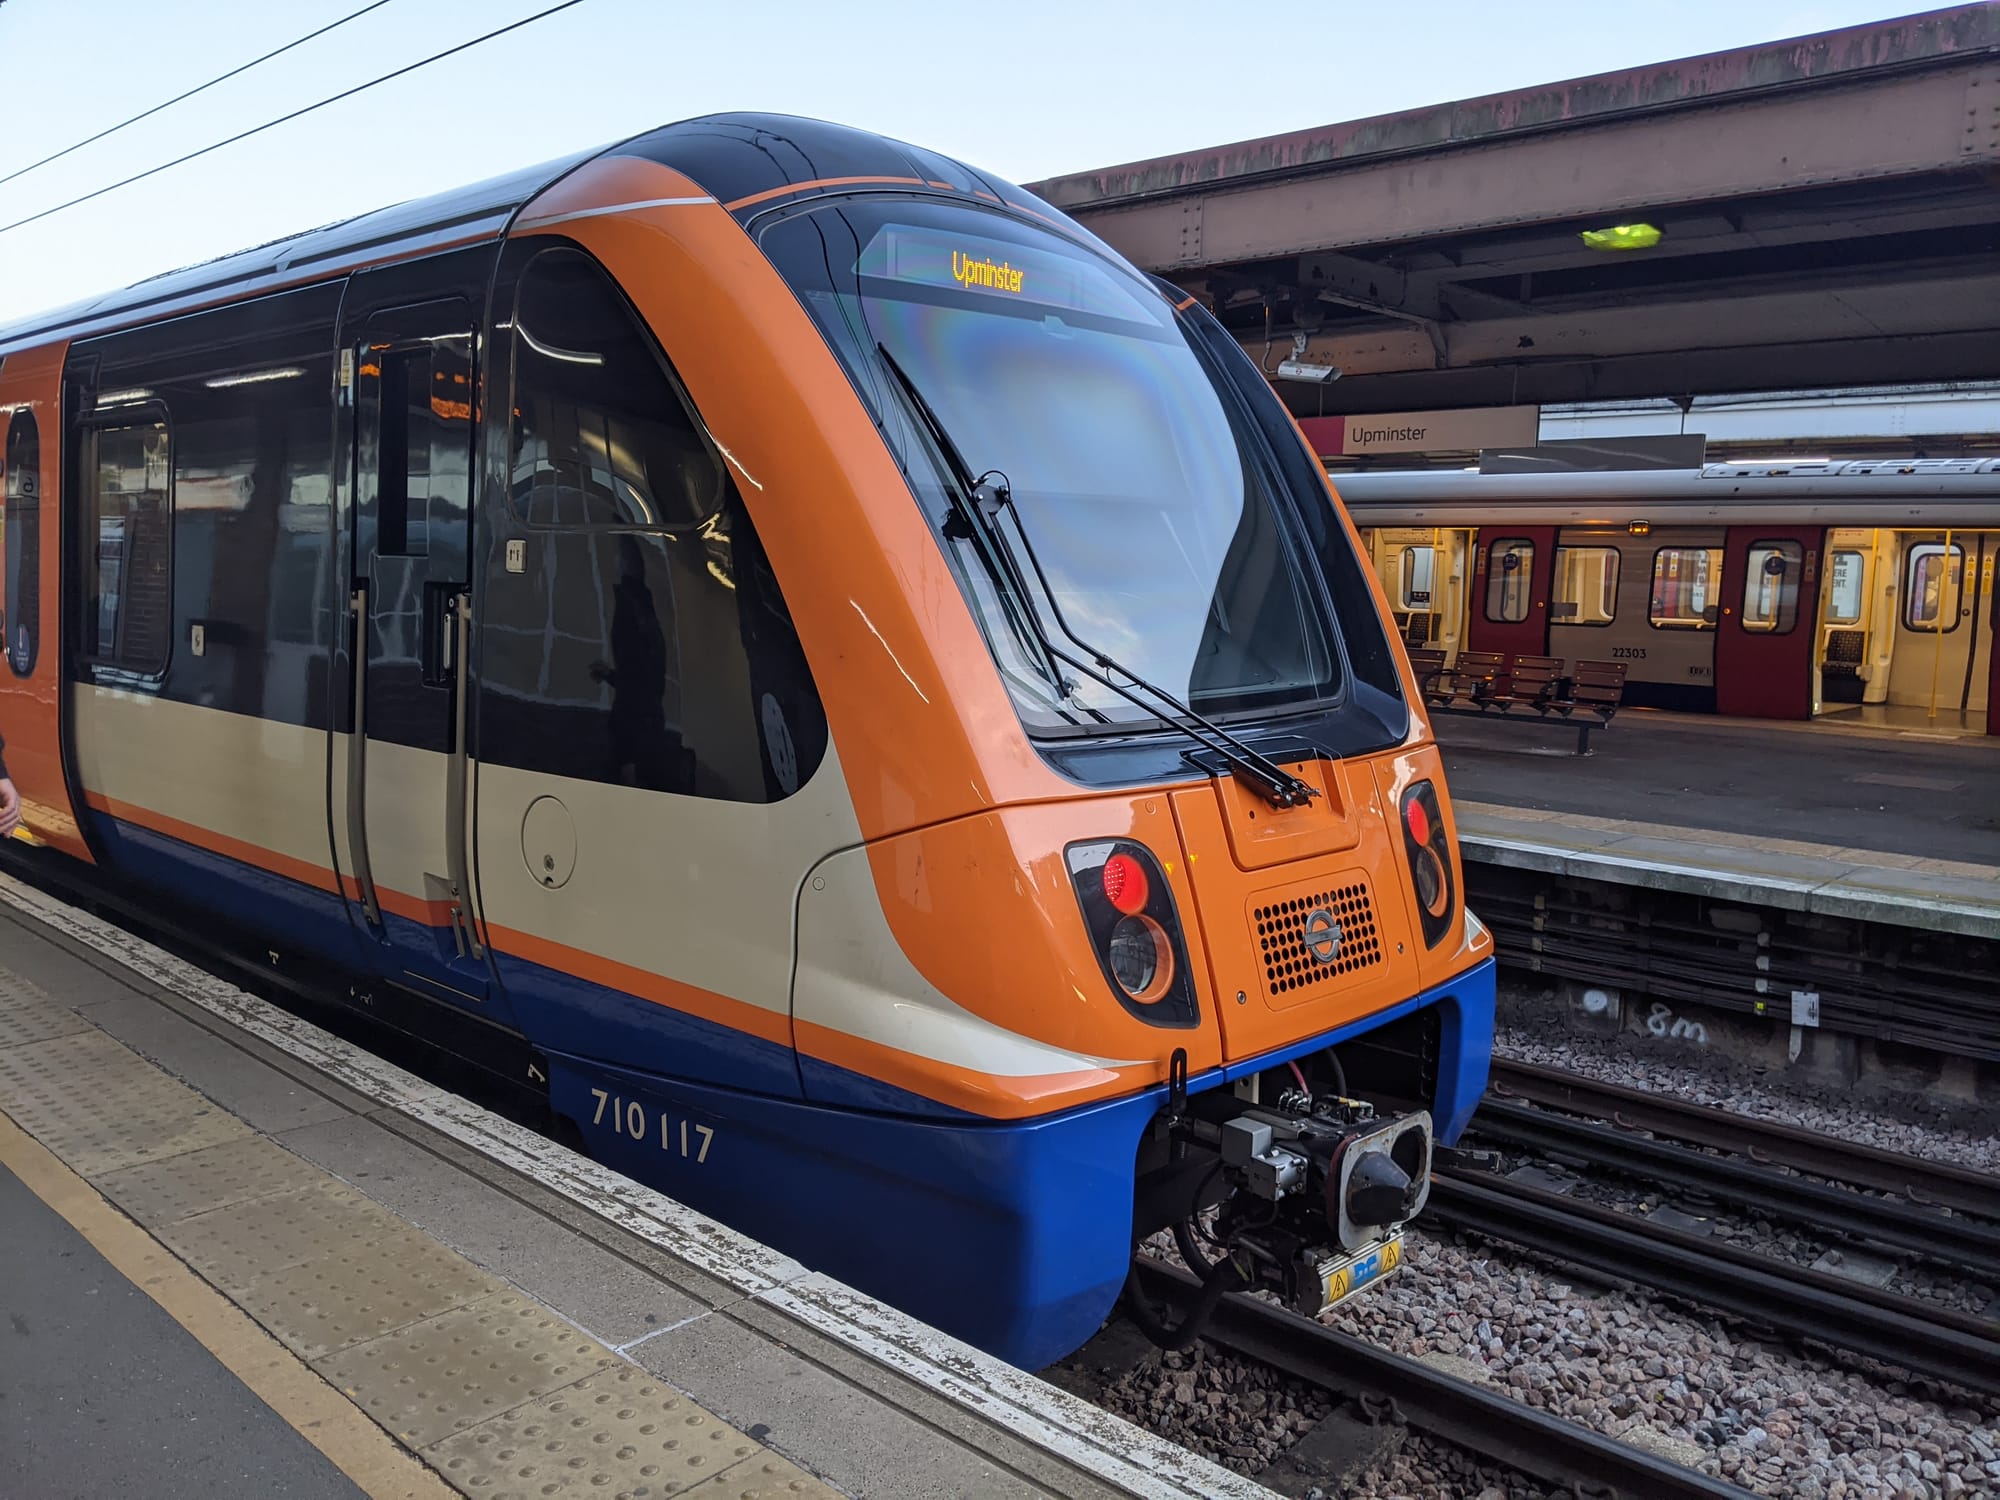 Class 710 Aventras on the Romford to Upminster Line